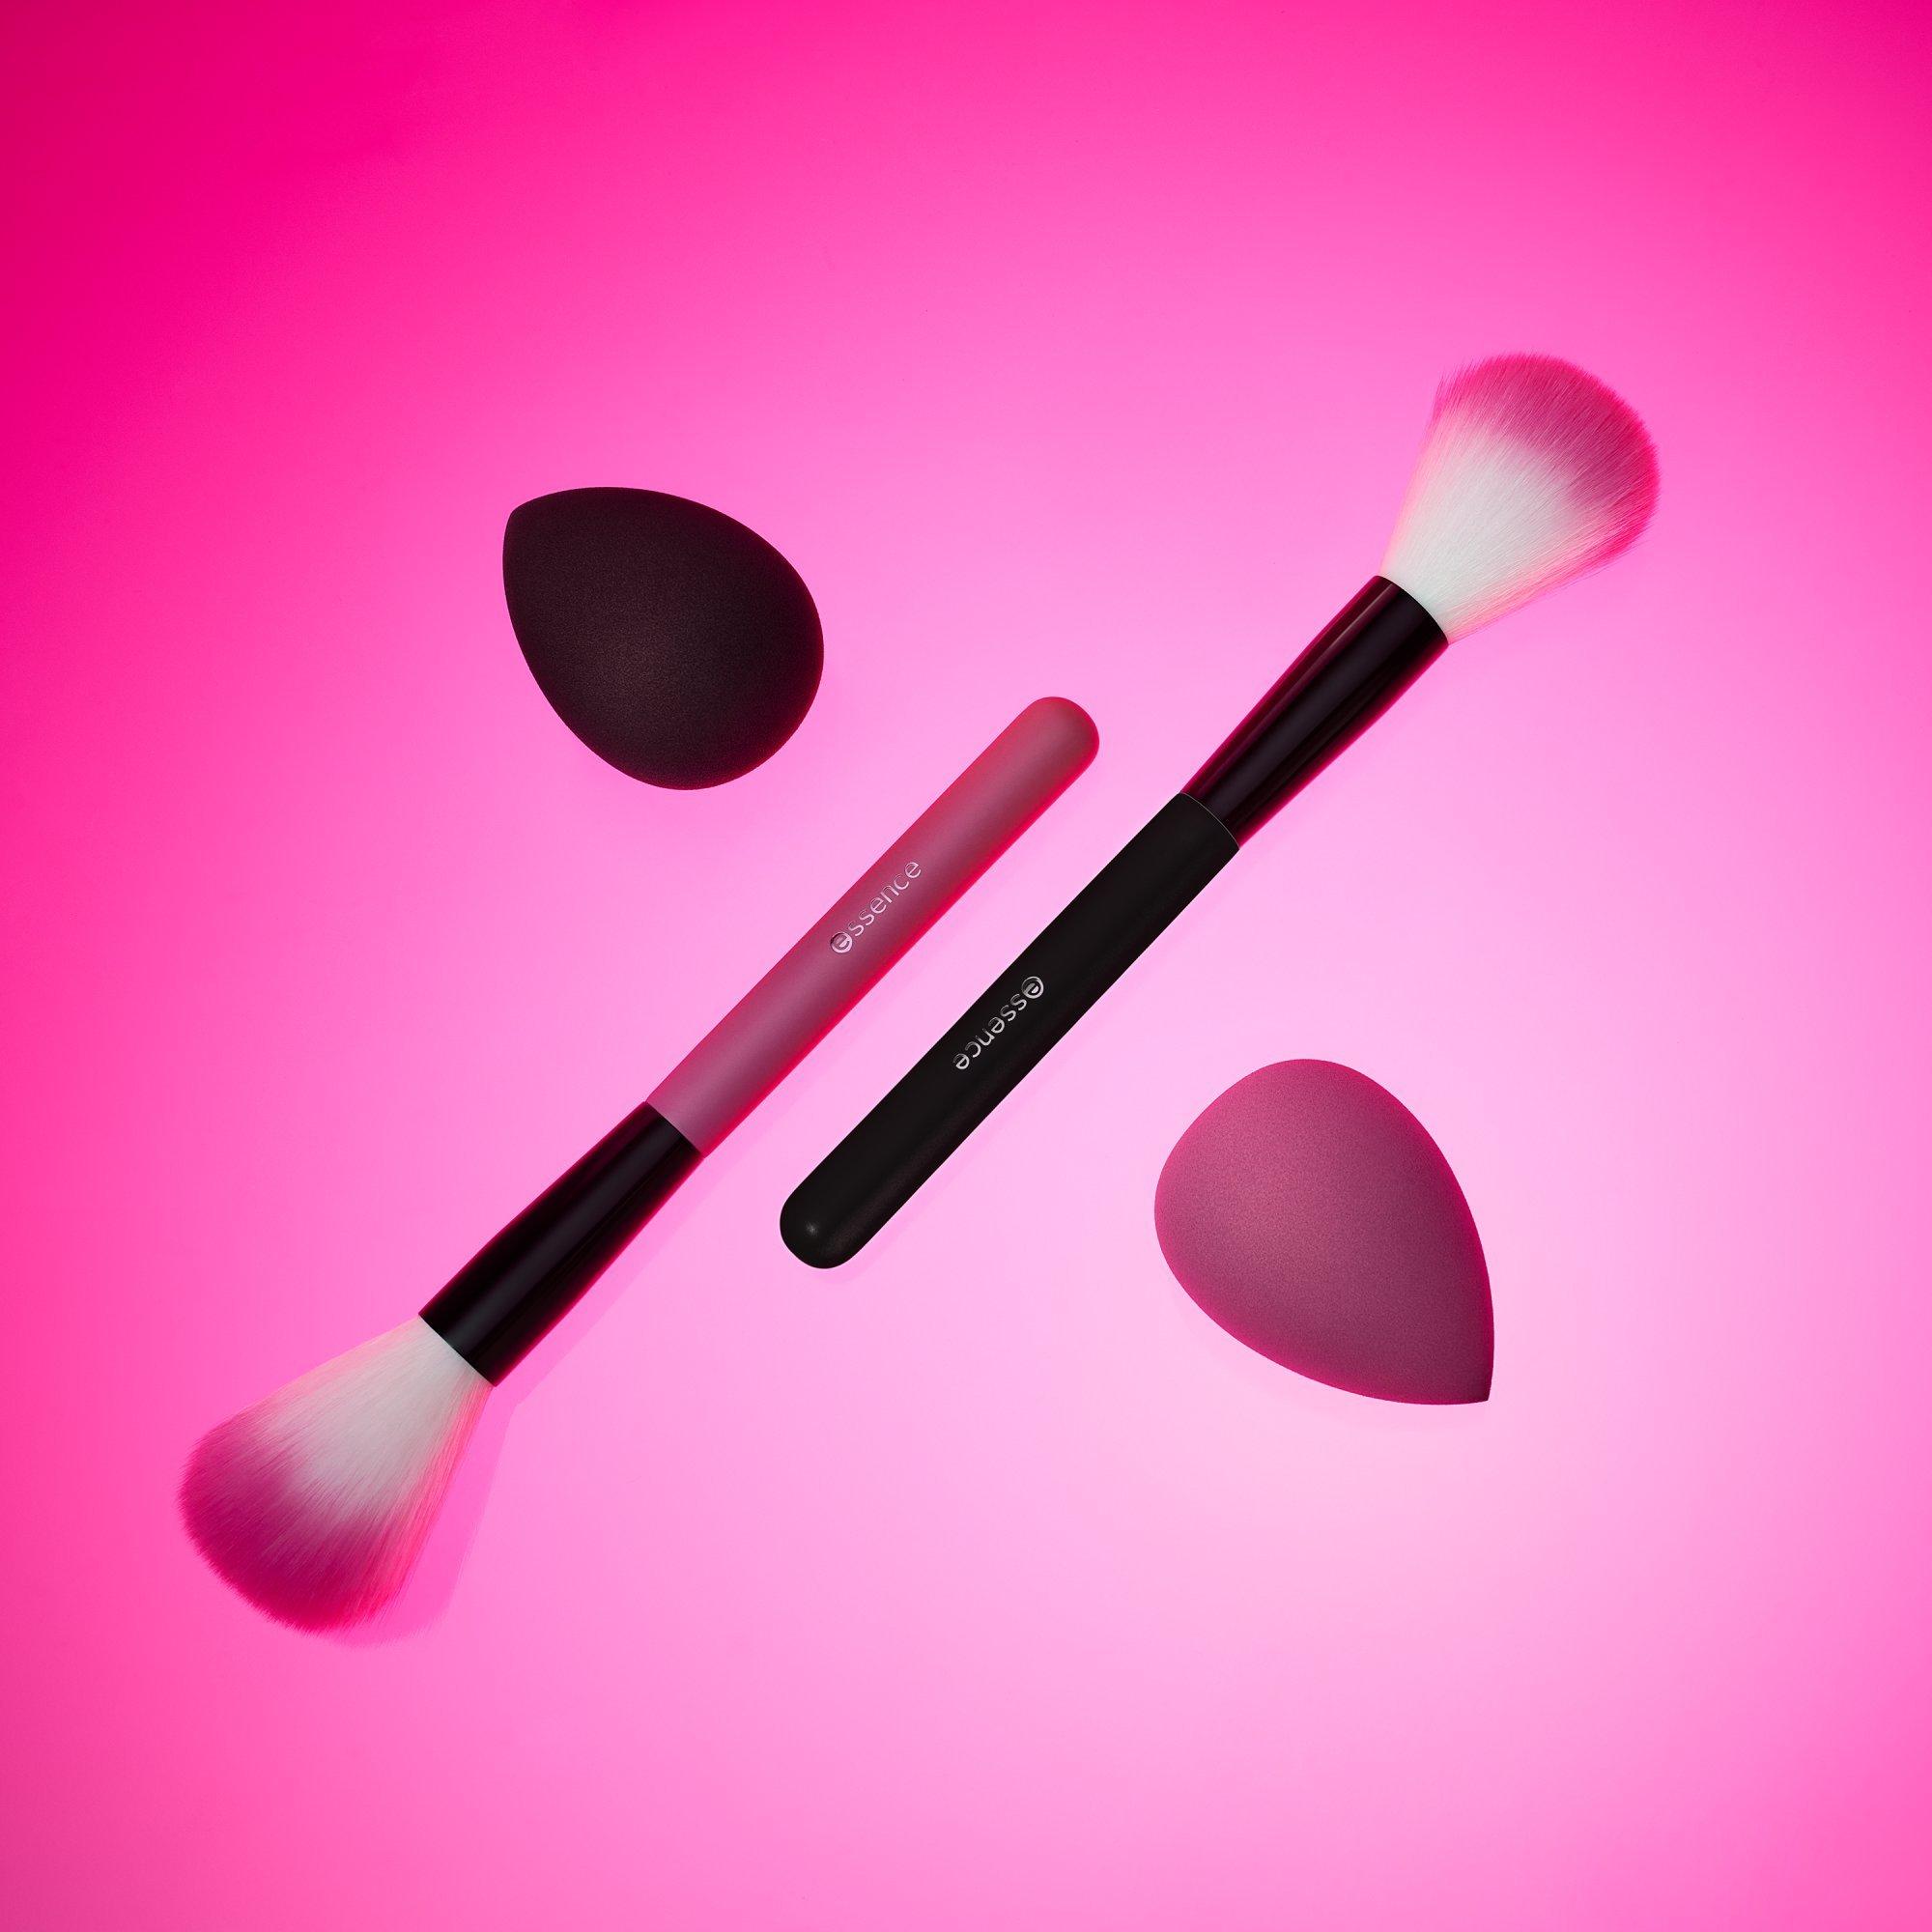 PINK is the new BLACK colour-changing powder brush